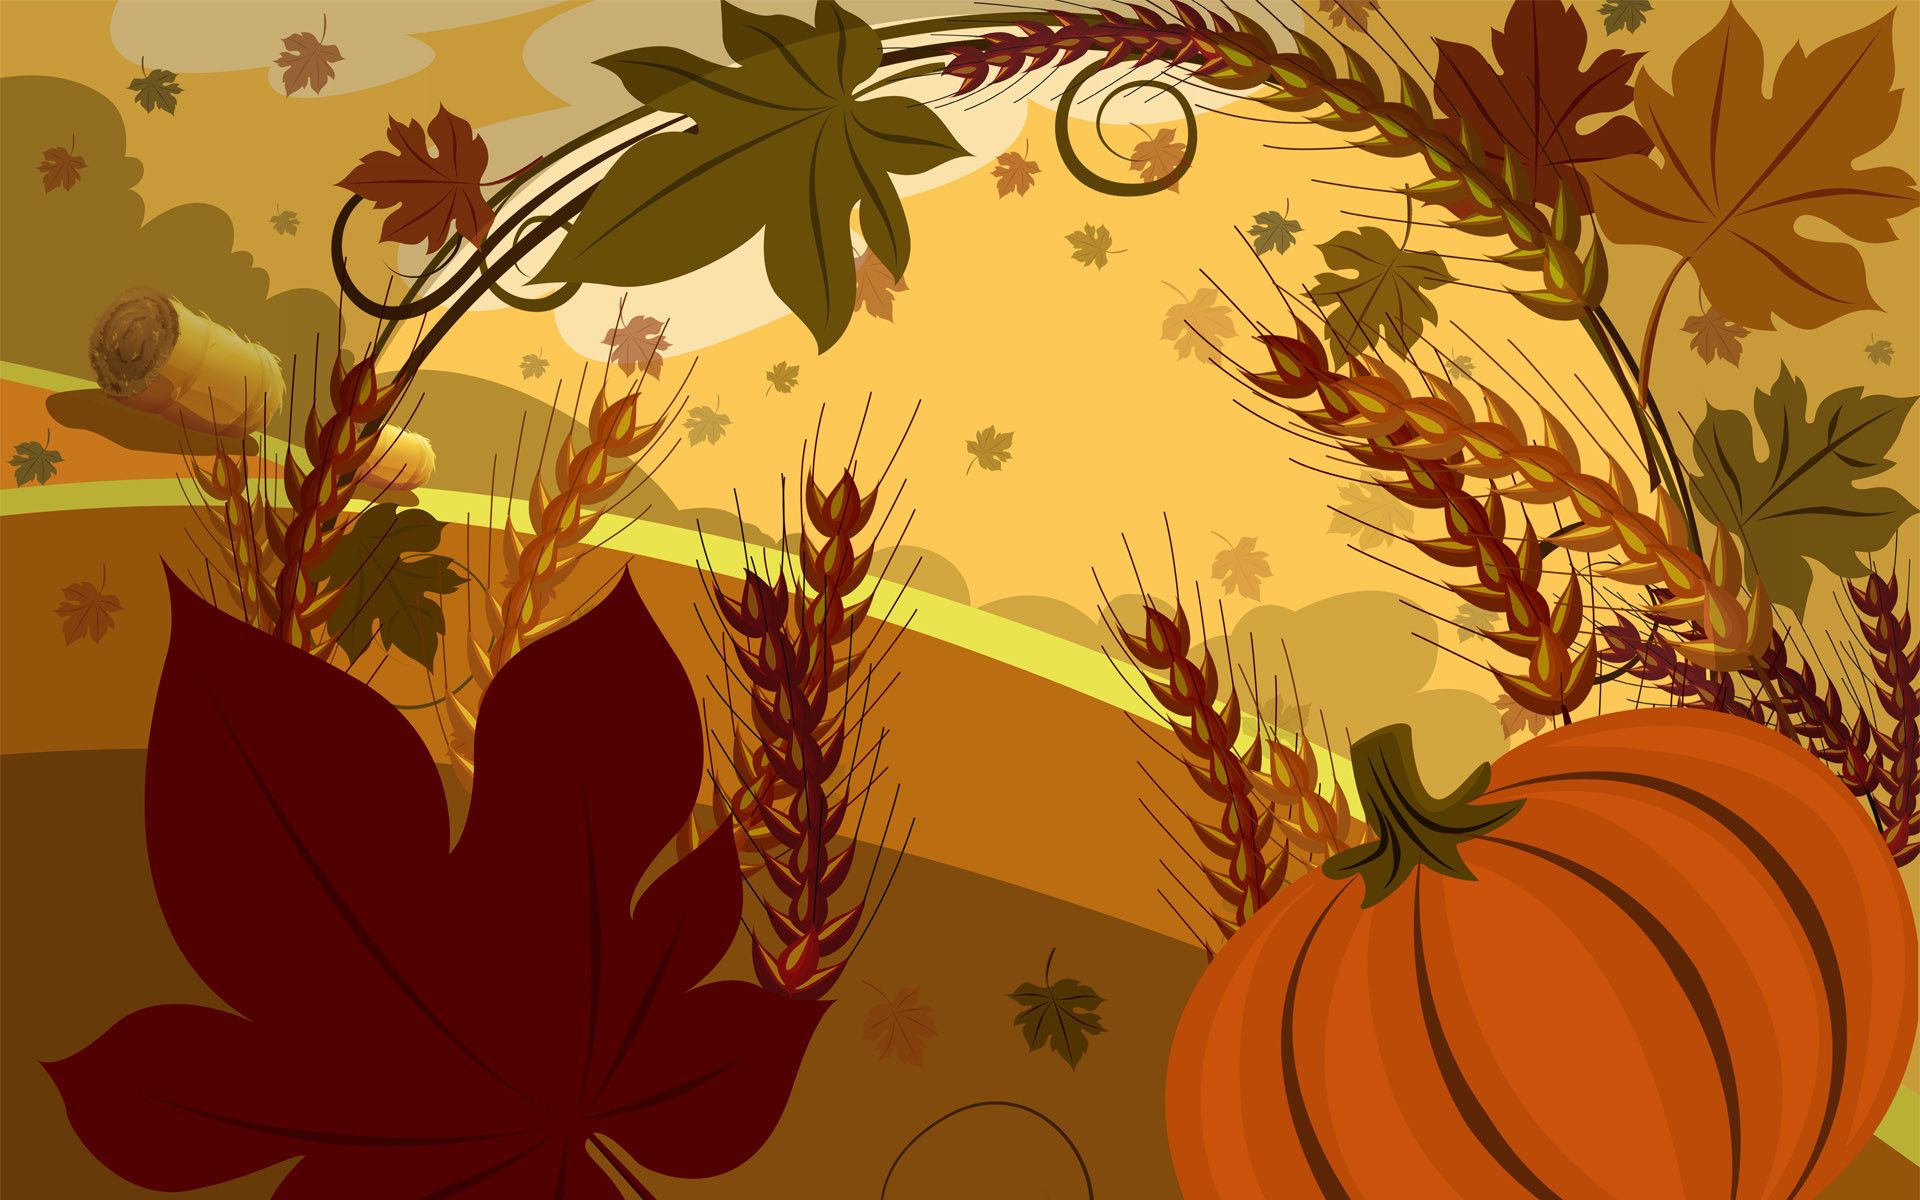 A pumpkin and wheat on a background of autumn leaves - Thanksgiving